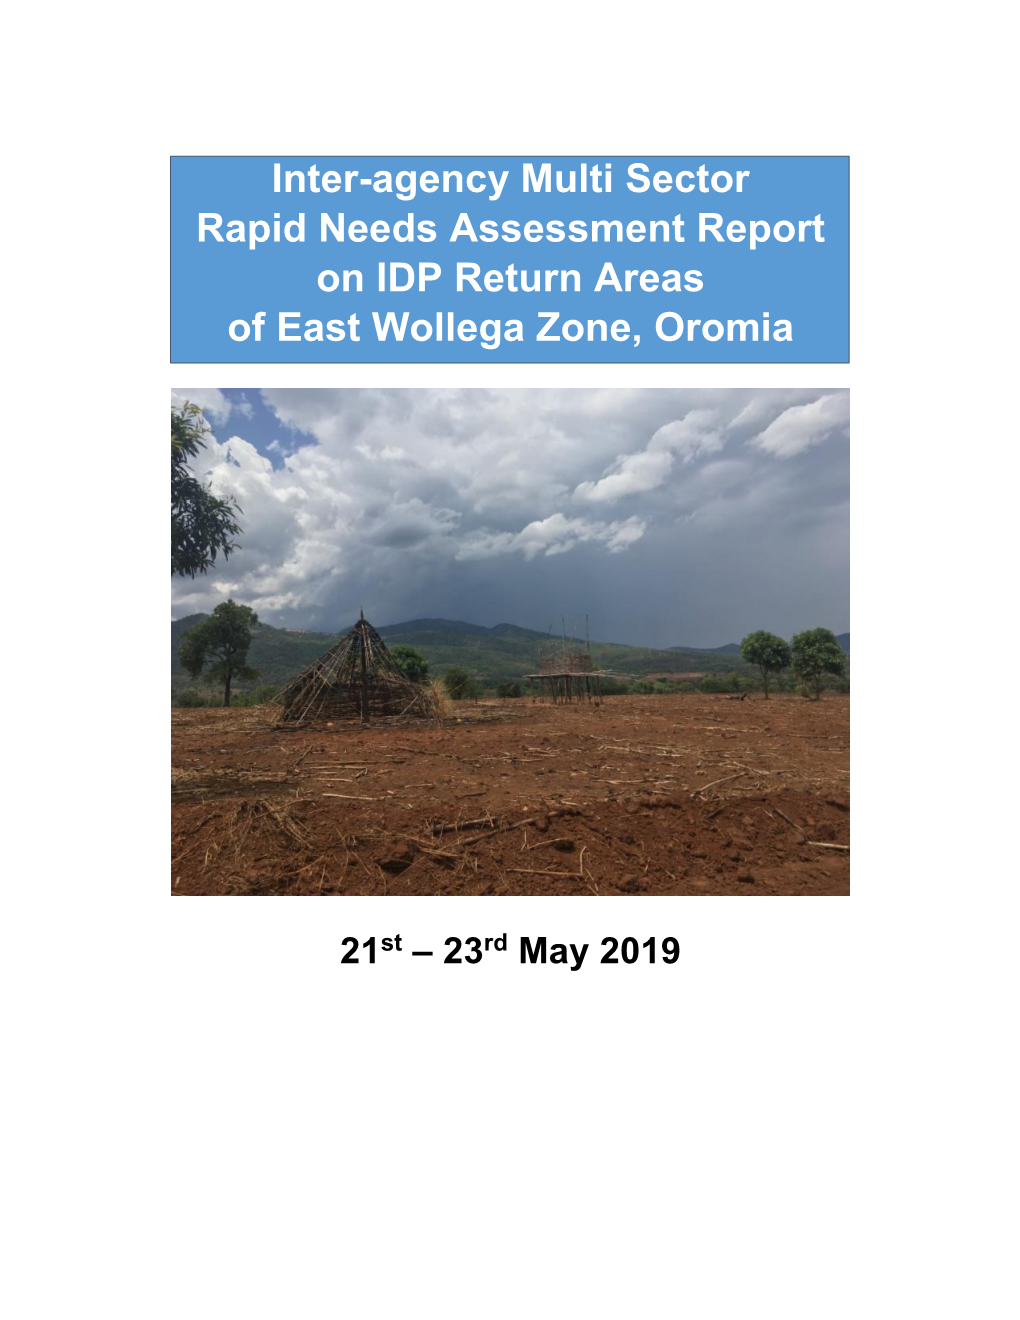 Inter-Agency Multi Sector Rapid Needs Assessment Report on IDP Return Areas of East Wollega Zone, Oromia